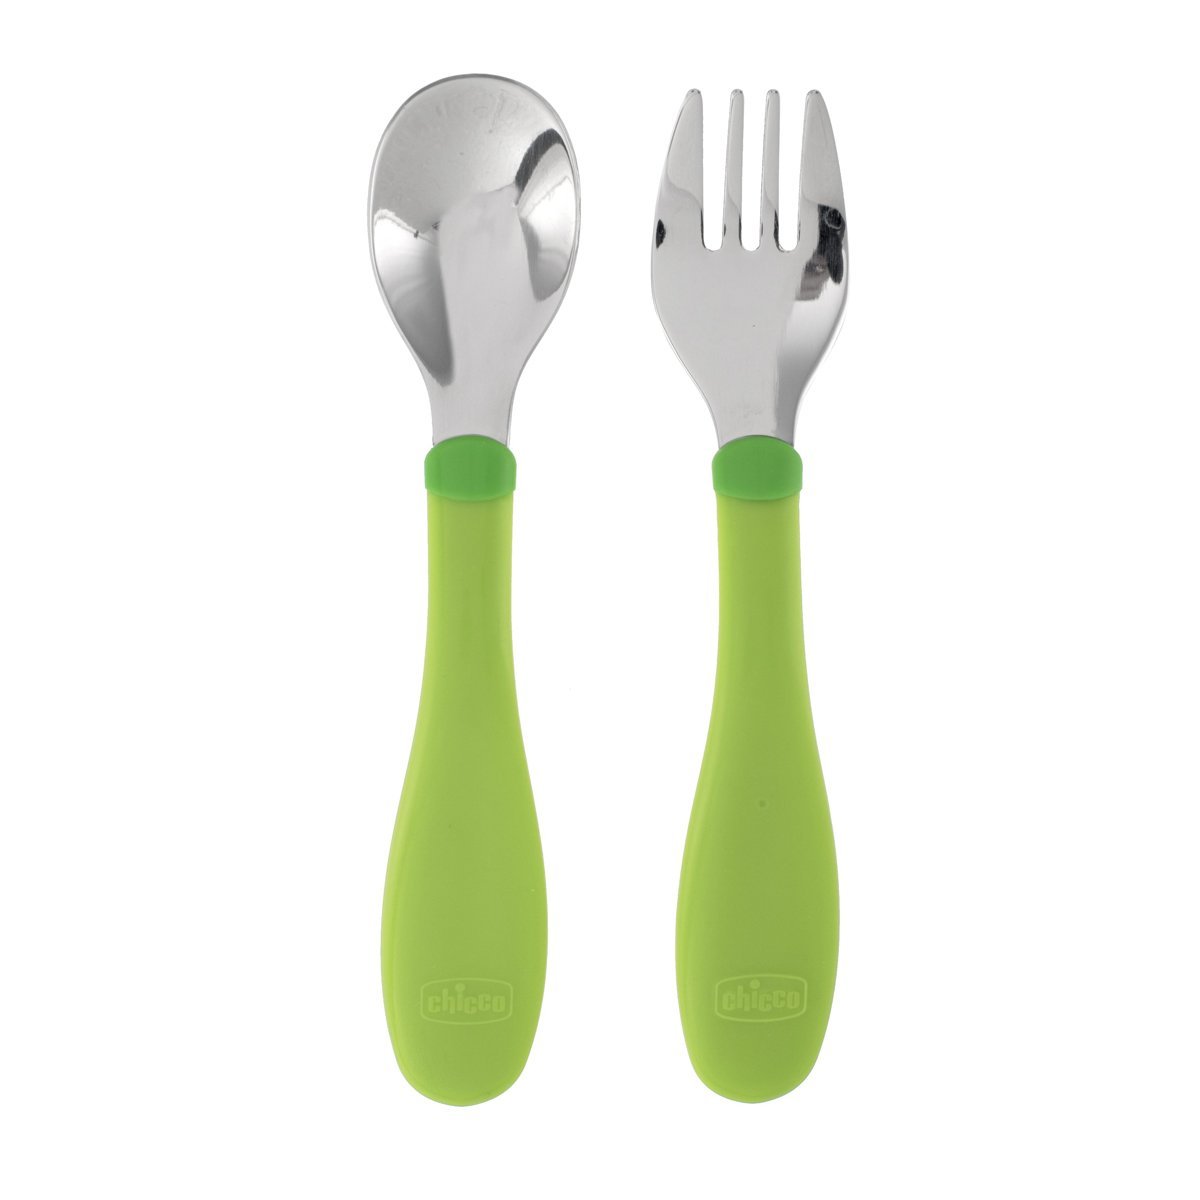 Chicco Couverts En Inox Vert Pomme Pour Bebe 18 Mois Cooking For My Baby